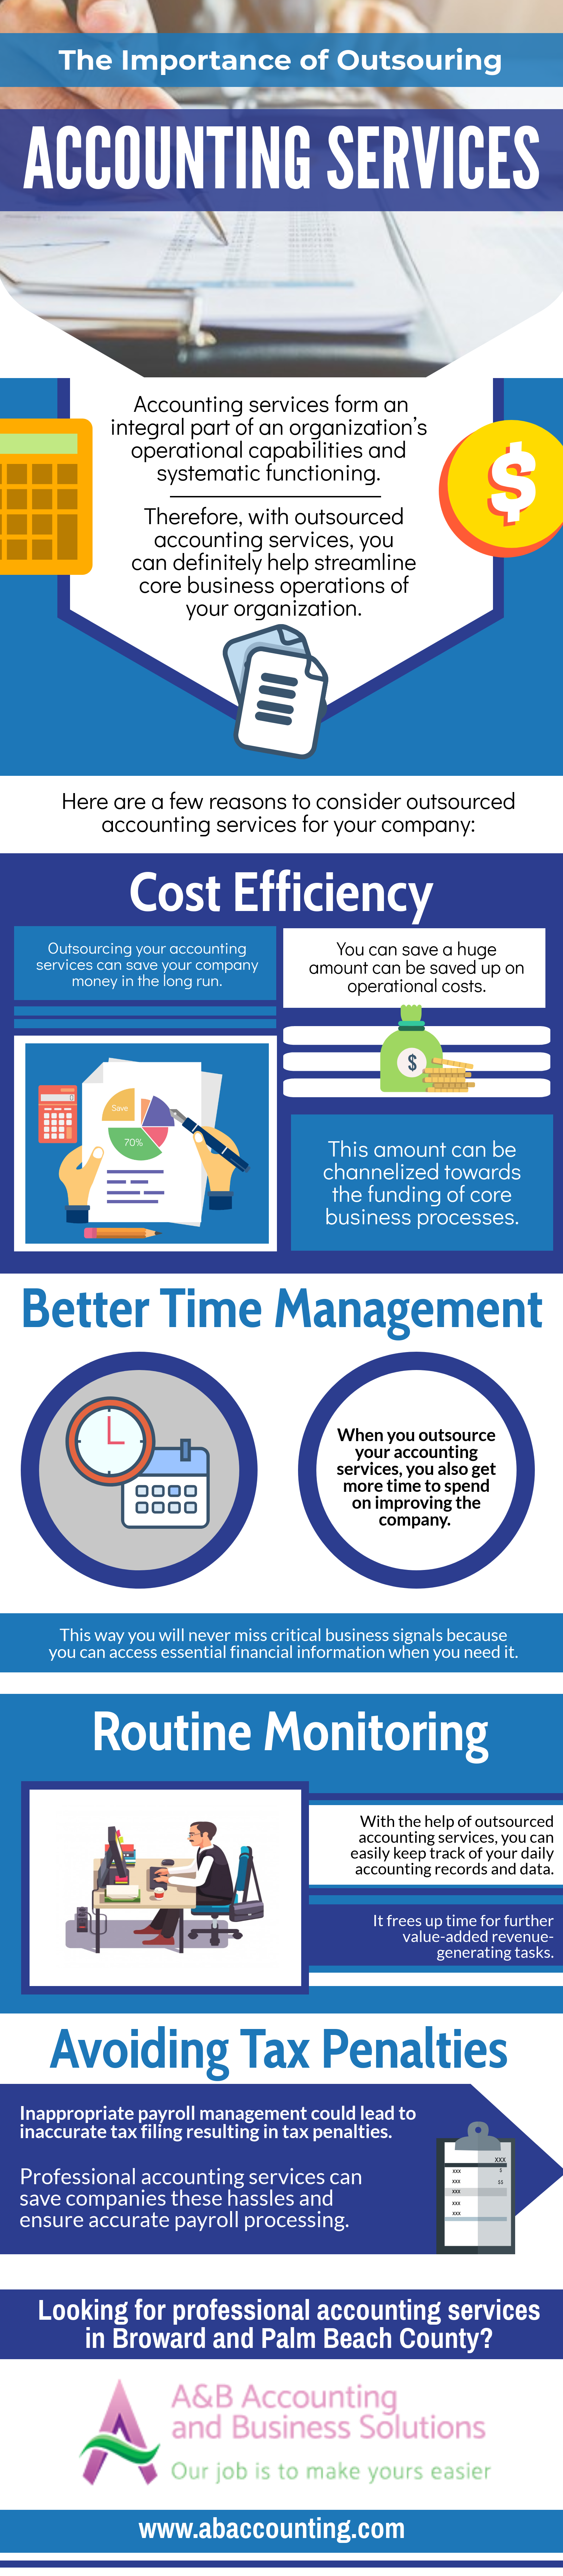 The Importance of Outsourcing Accounting Services - Infographic